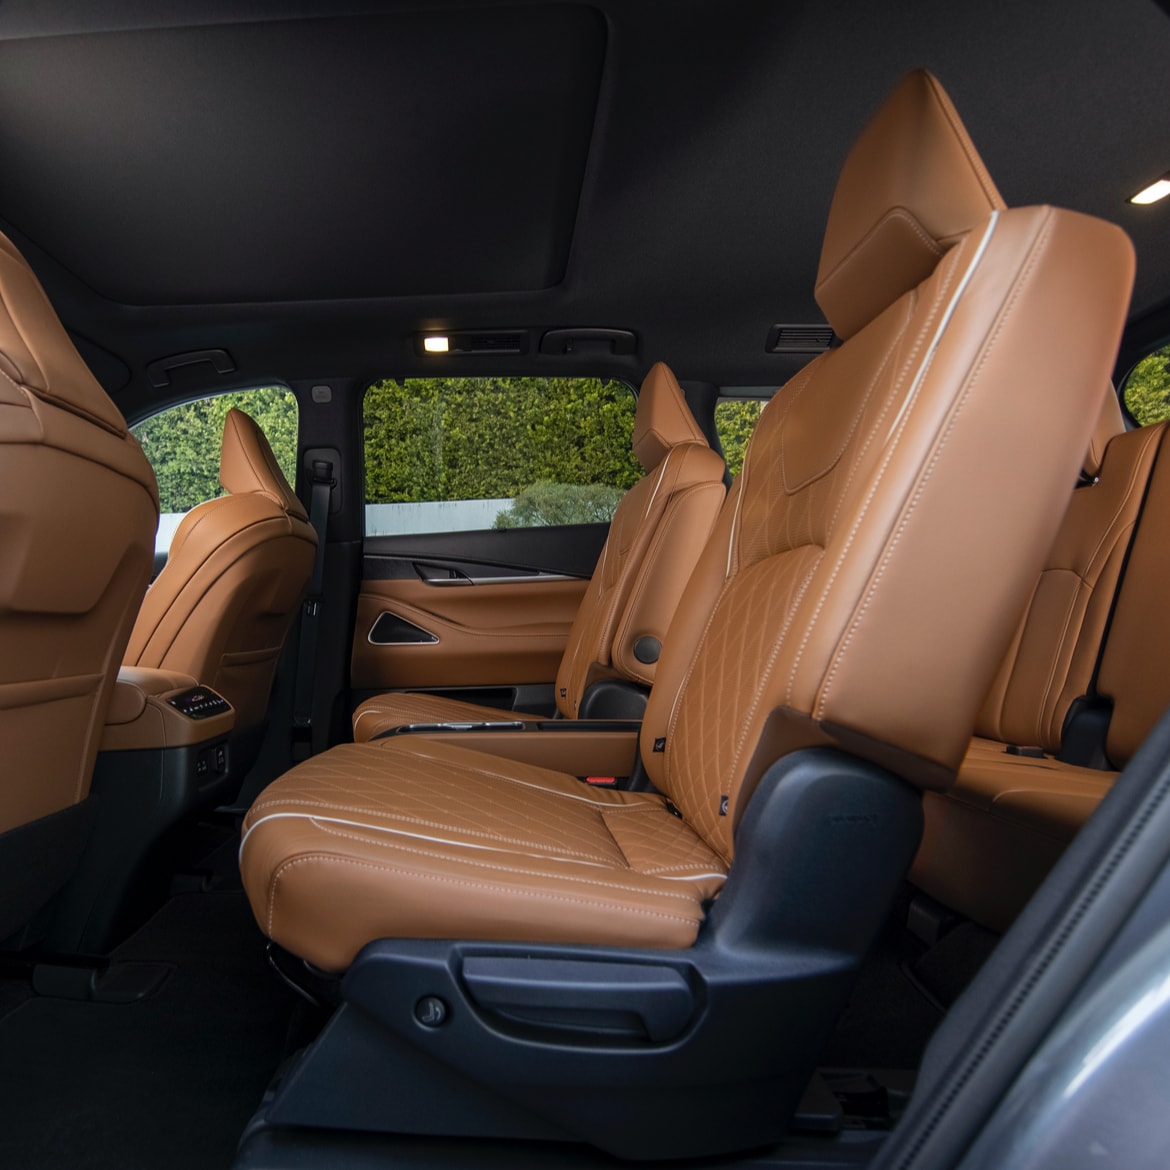 The rear leather seats inside the INFINITI QX60